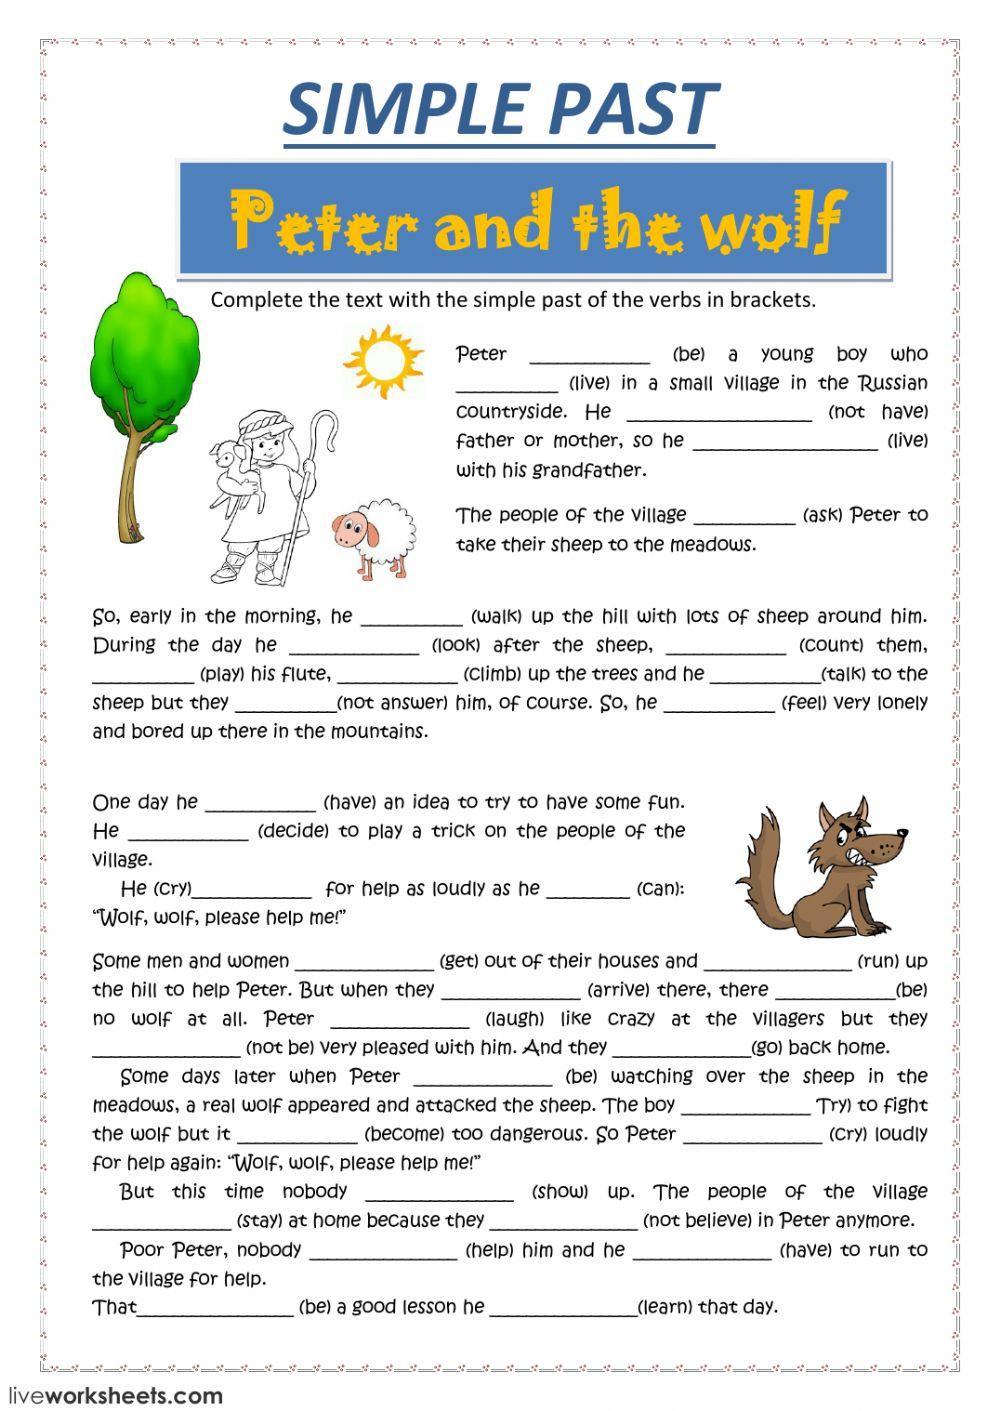 PETER and the wolf